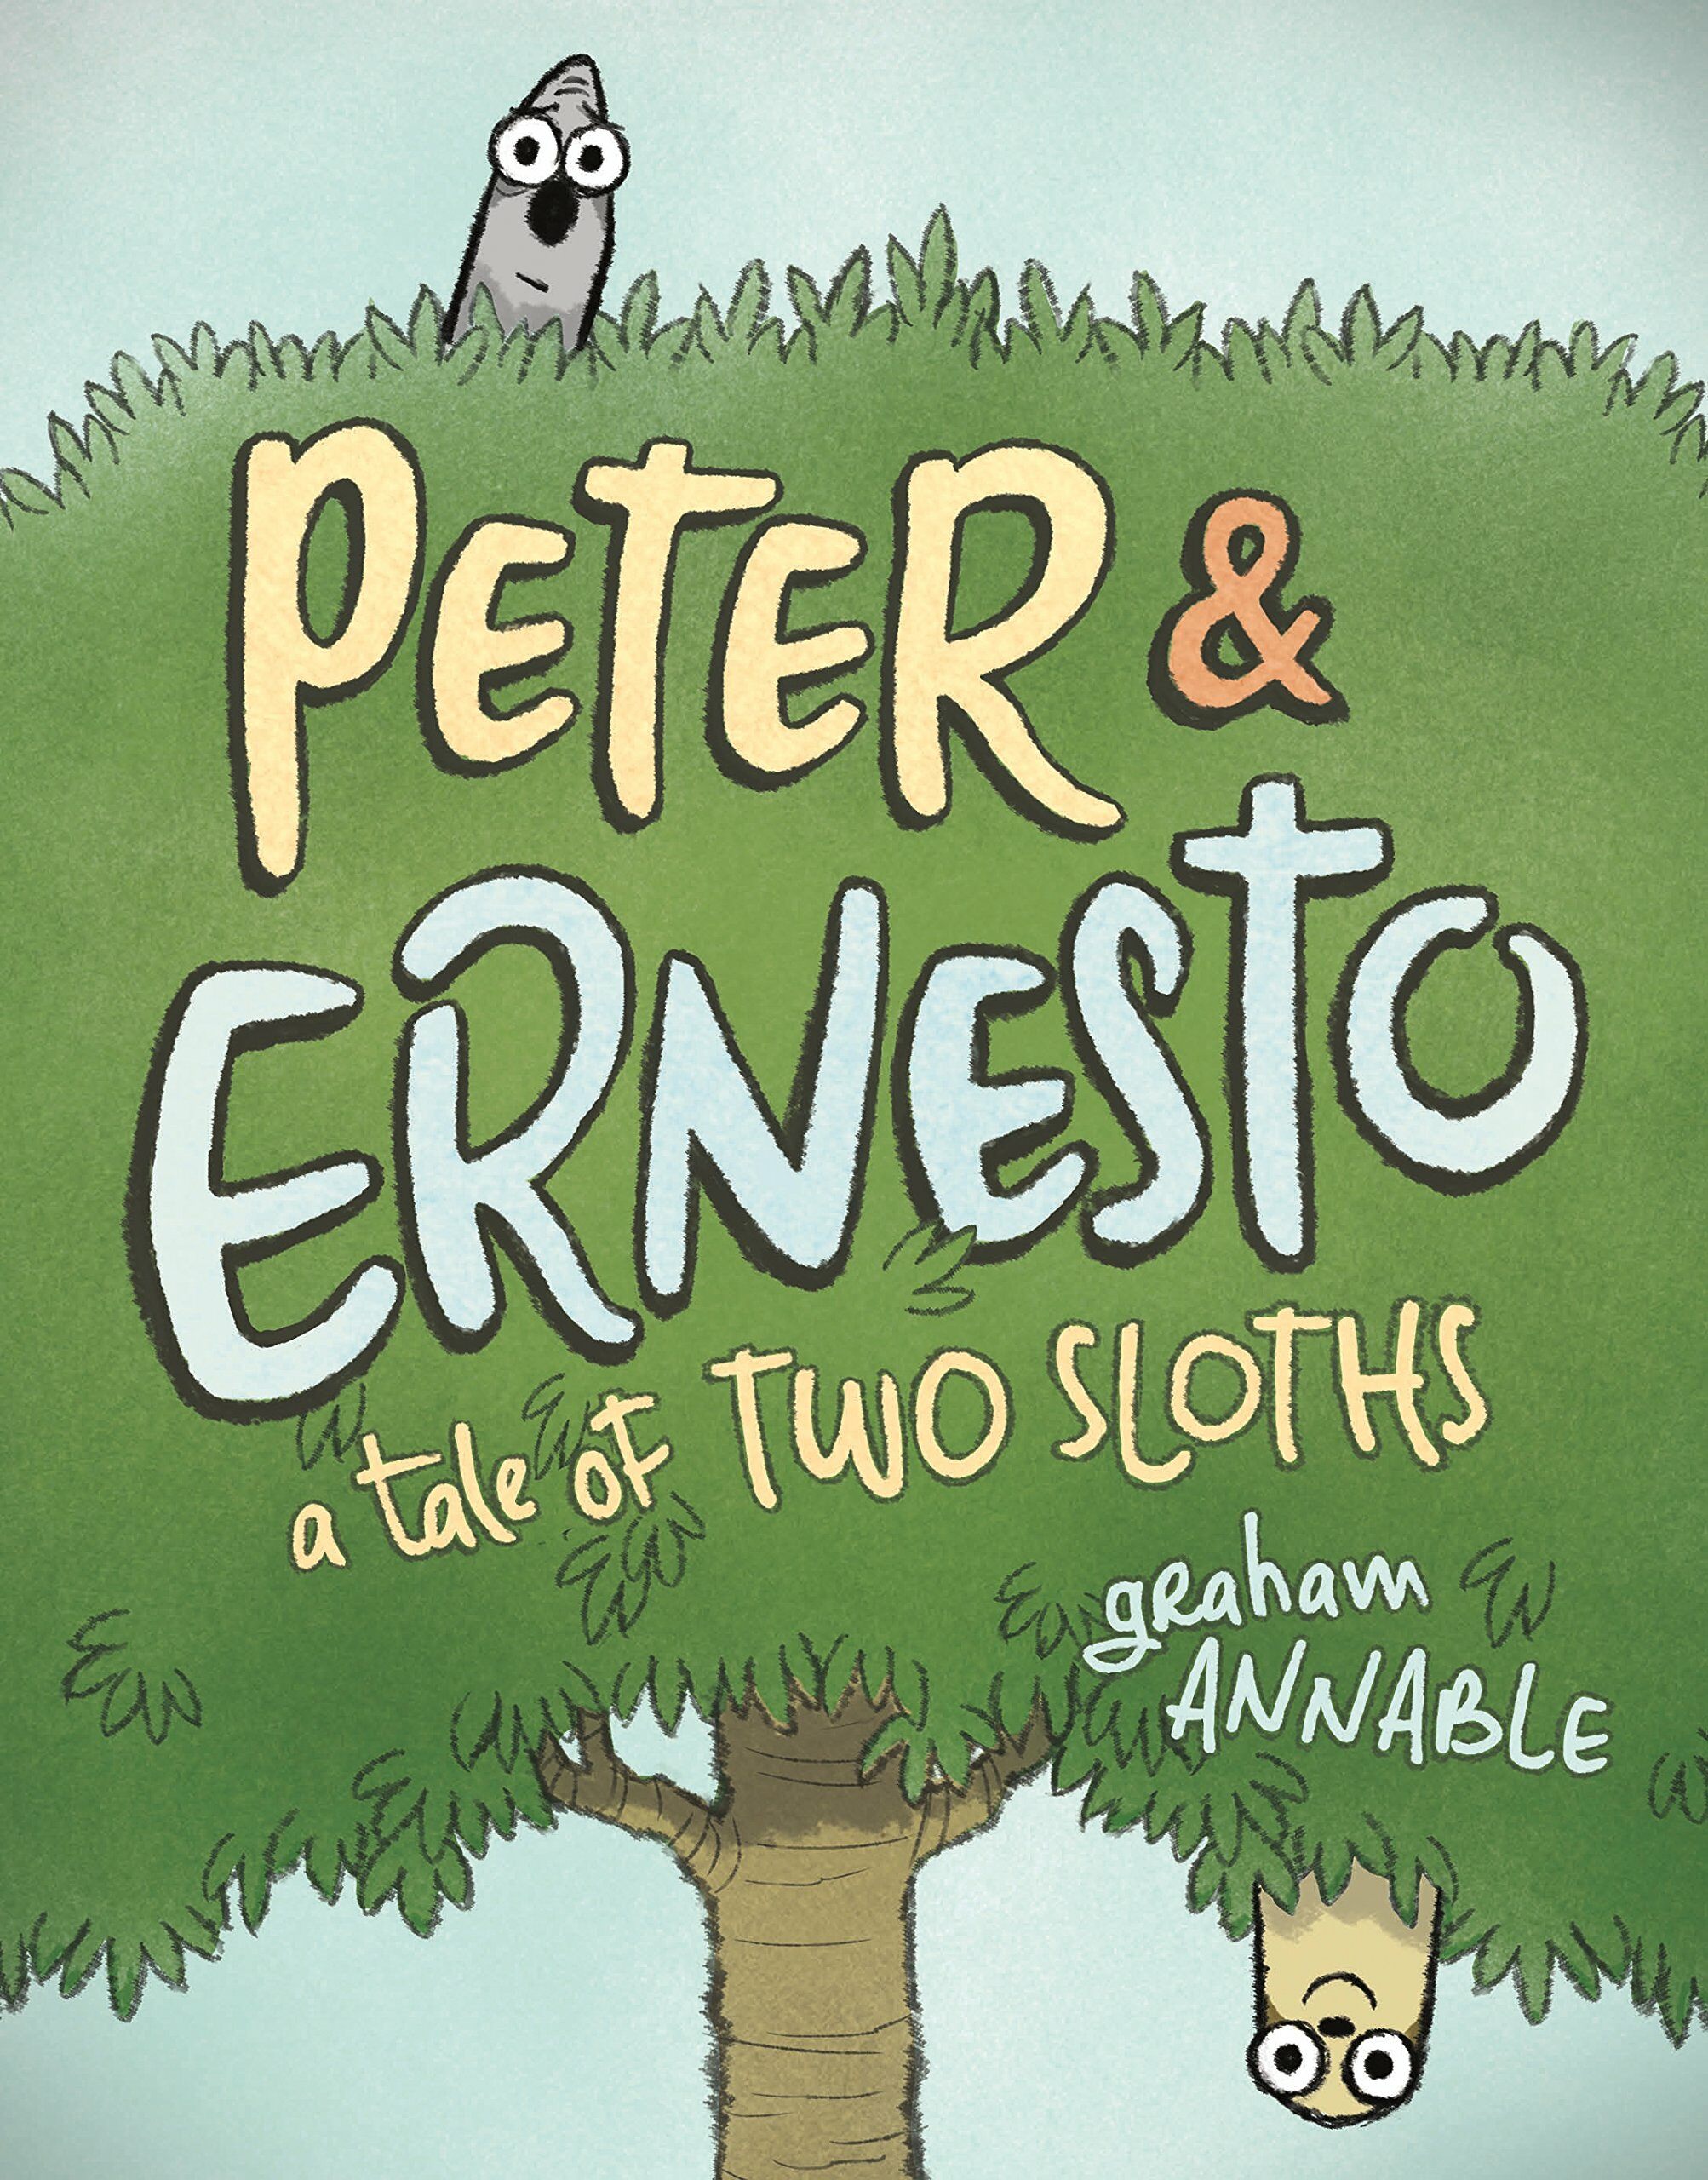 Peter & Ernesto: A Tale of Two Sloths (Hardcover)